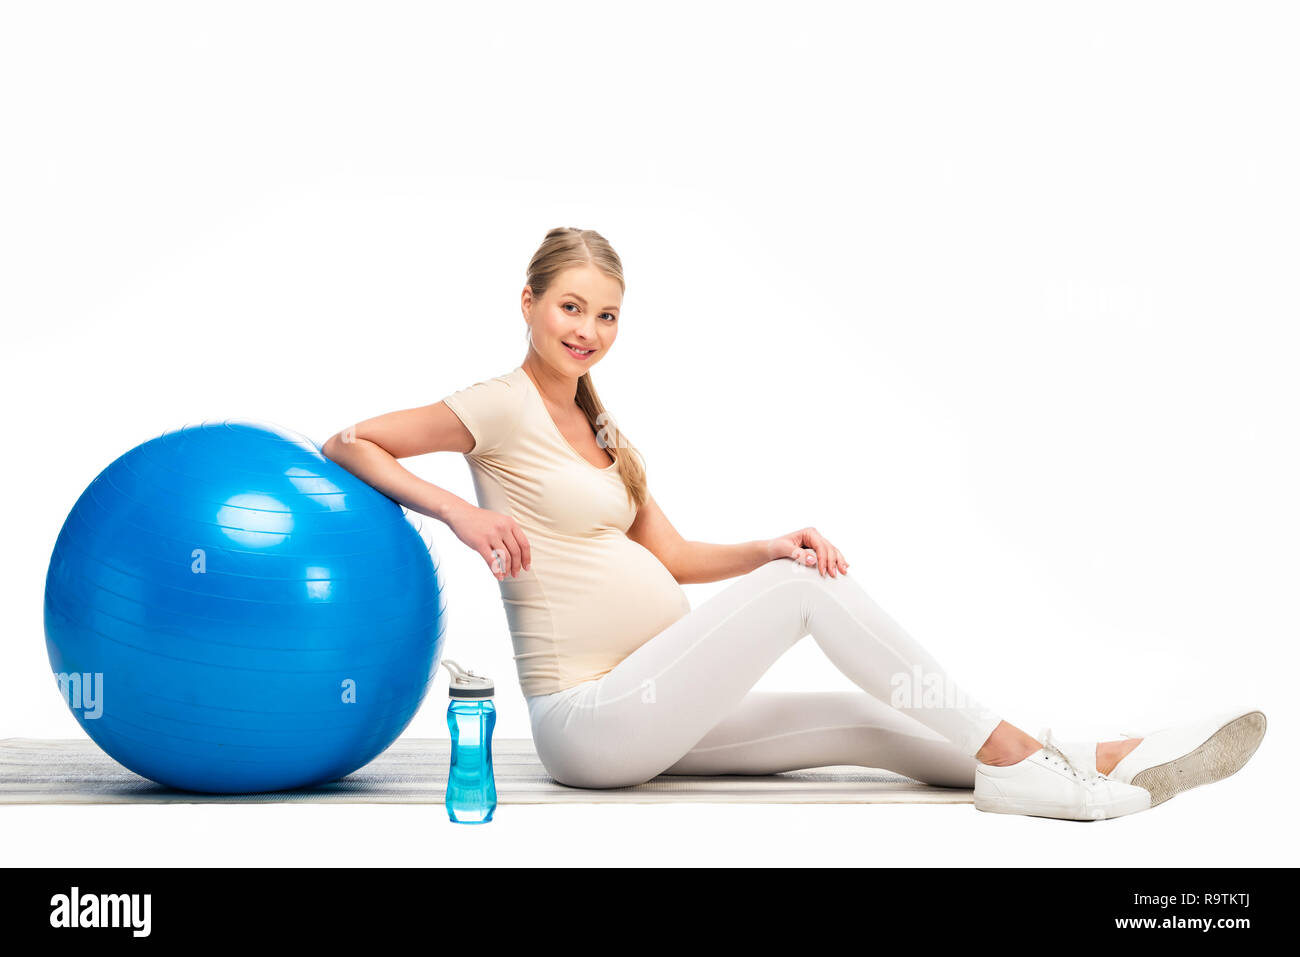 Enceinte blonde woman sitting on floor with blue fitness ball isolated on white Banque D'Images